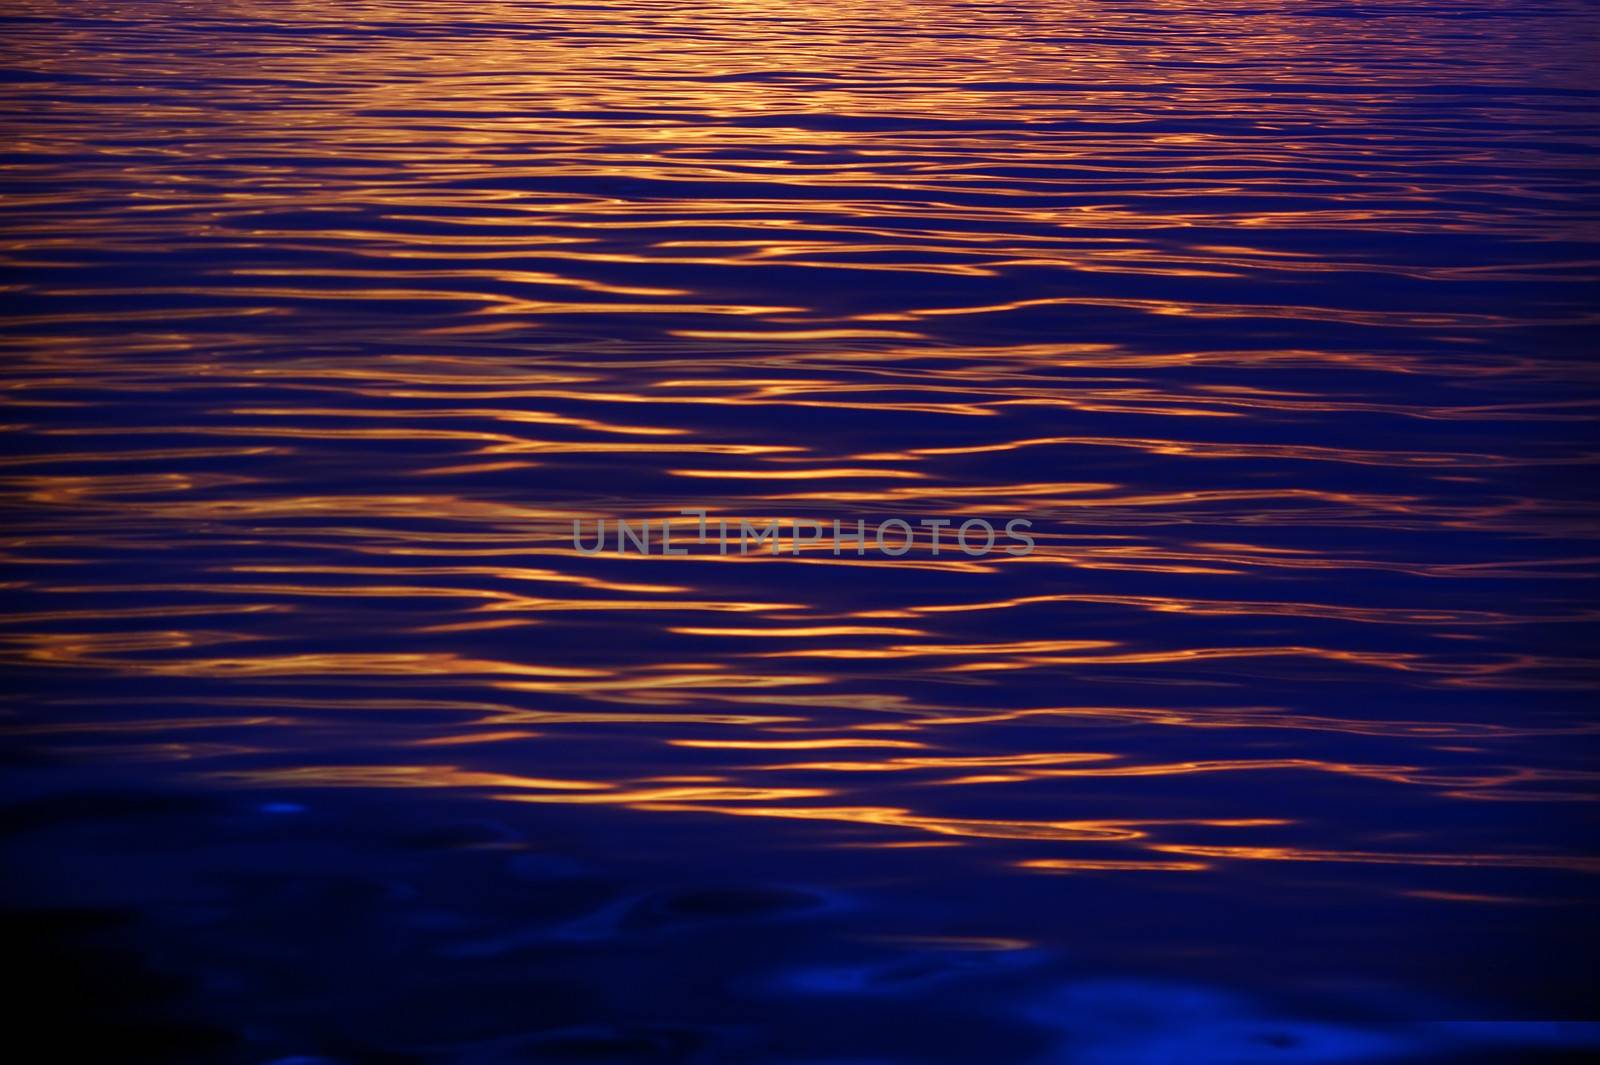 Sunset shining sea, showing beautiful golden and blue ripples